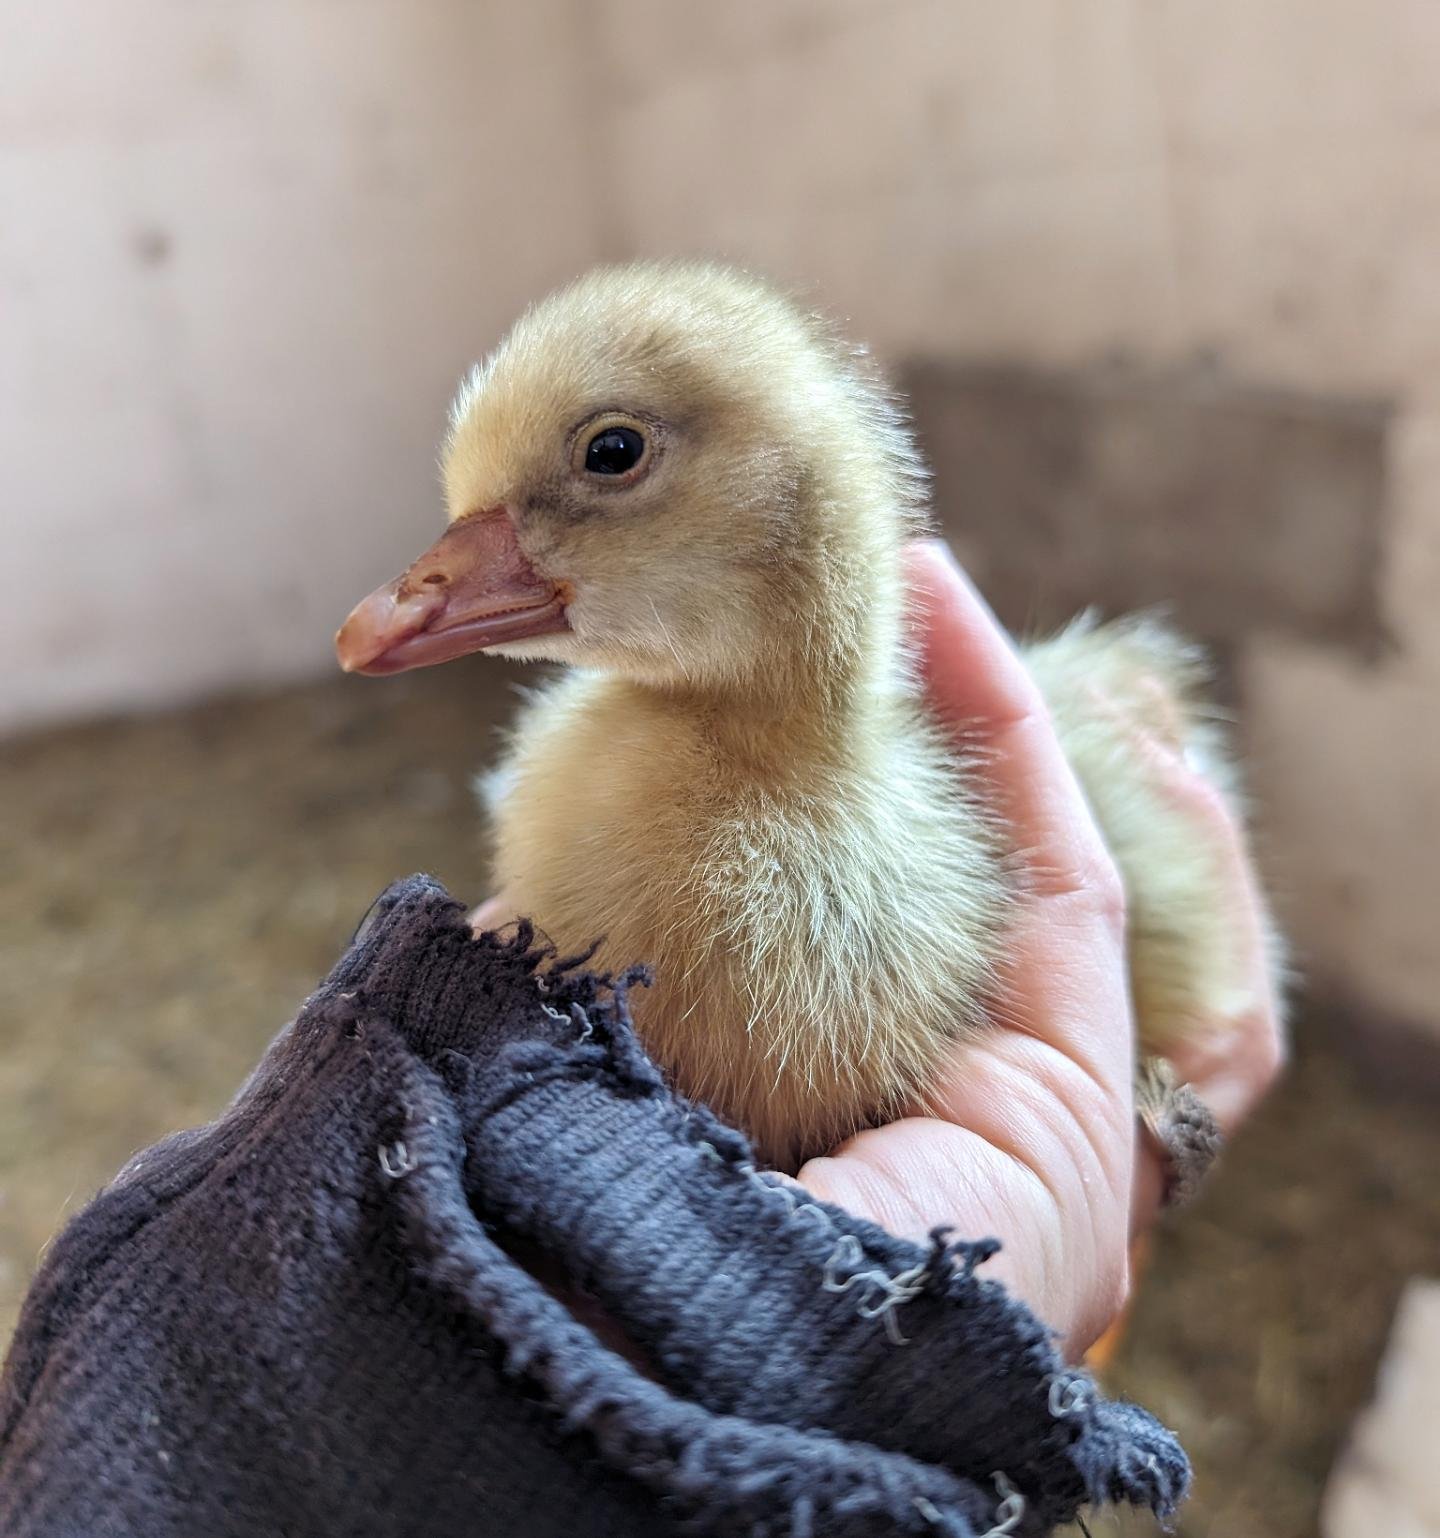 Baby Goslings Hatched! 
After impatiently waiting for what seemed like years, the three headed goose (Lady Goose and the Two Camillas) hatched out two little goslings. Mamas are doing really well with them and are so sweet to watch. We're clearly in 